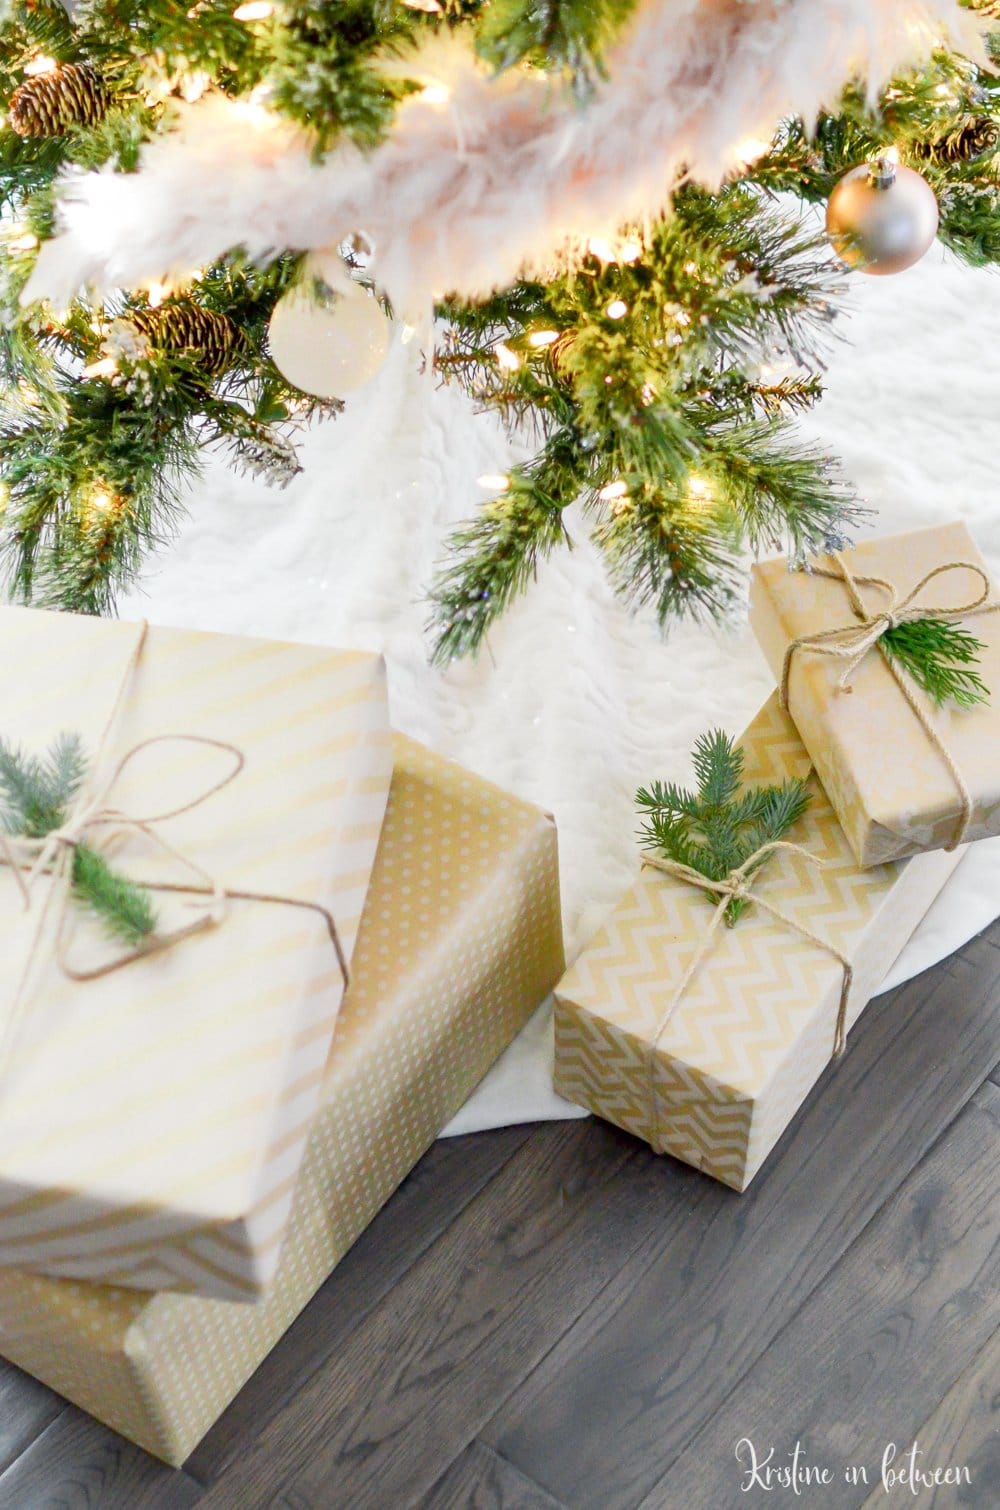 Awesome gift wrapping tricks for people who hate wrapping! Save time and have beautiful gifts this year!